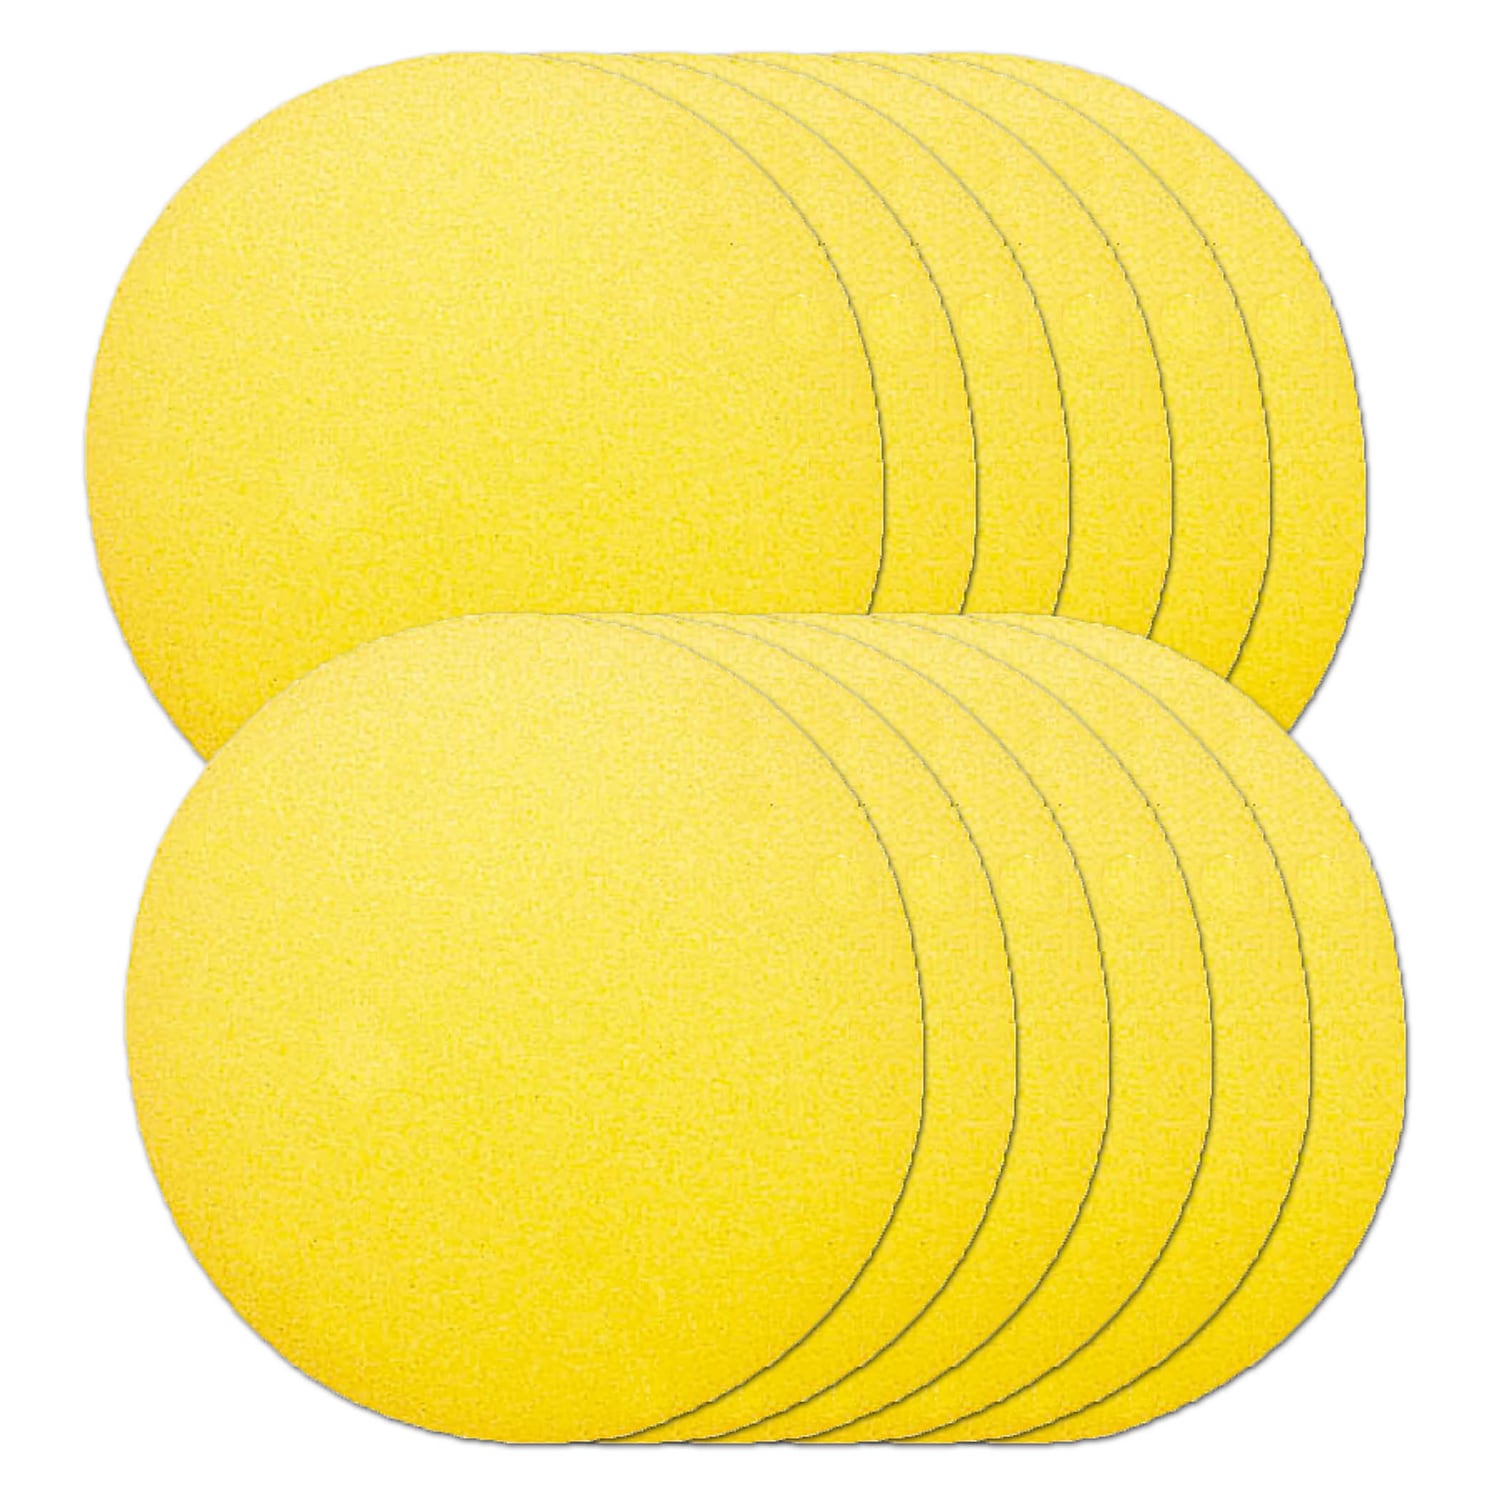 Dick Martin Sports MASFBY4-12 Foam Ball 4 Uncoated, Yellow - 12 Each - image 1 of 2